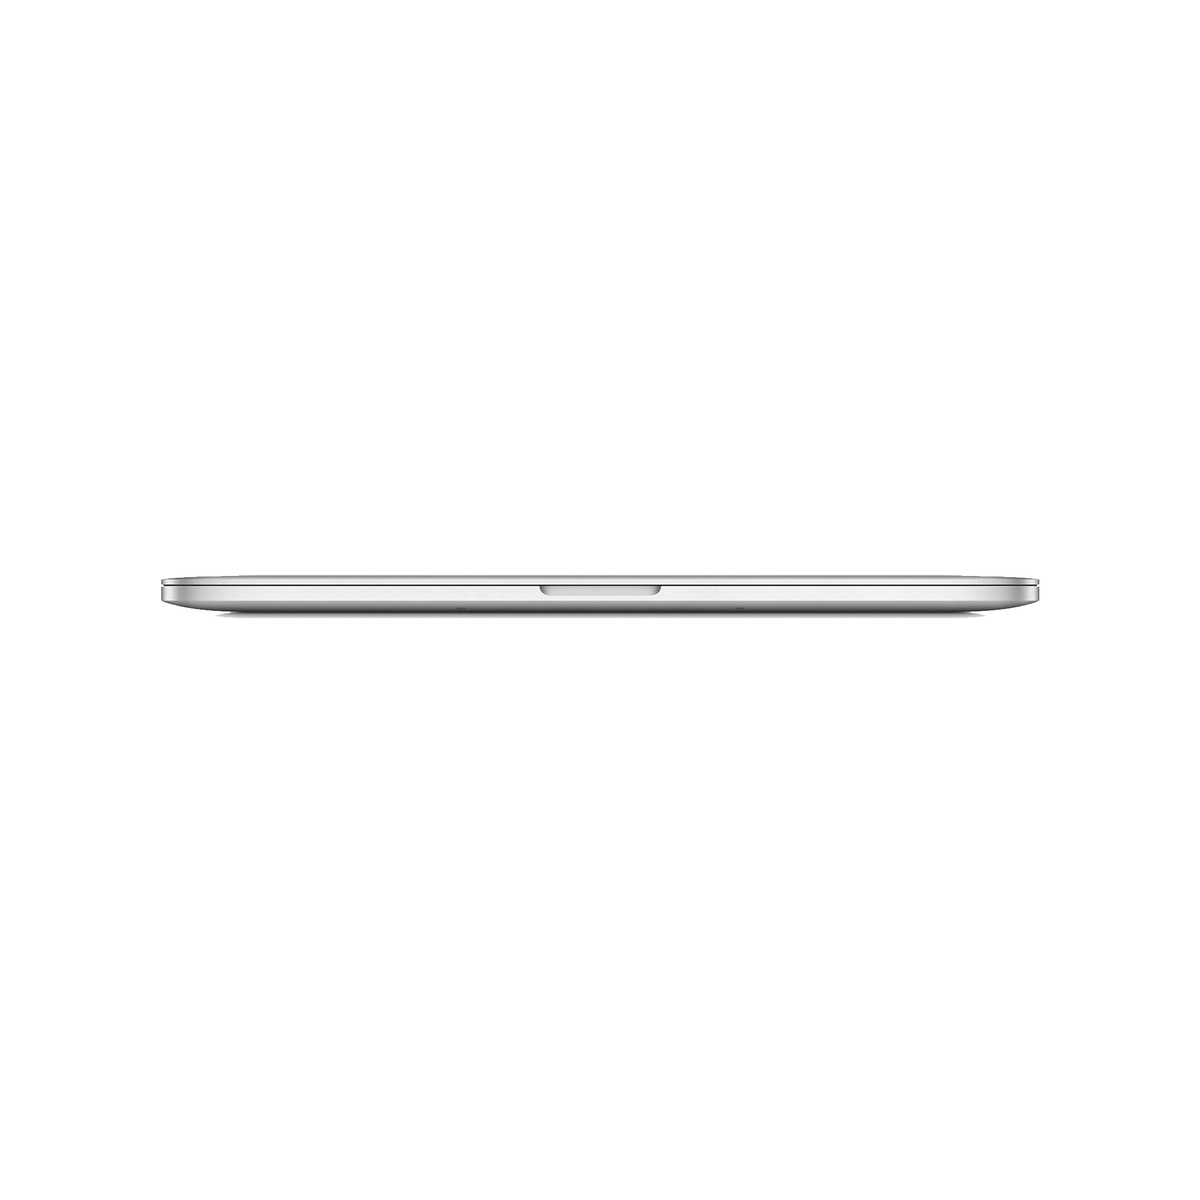 MacBook Pro Touch Bar With  16-inch LED-backlit Display, Core i7 Processor,2.6GHz 6-core,16GB RAM,512GB SSD,AMD Radeon Pro 5300M with 4GB of GDDR6 memory,Space Grey (MVVJ2ZS/A)